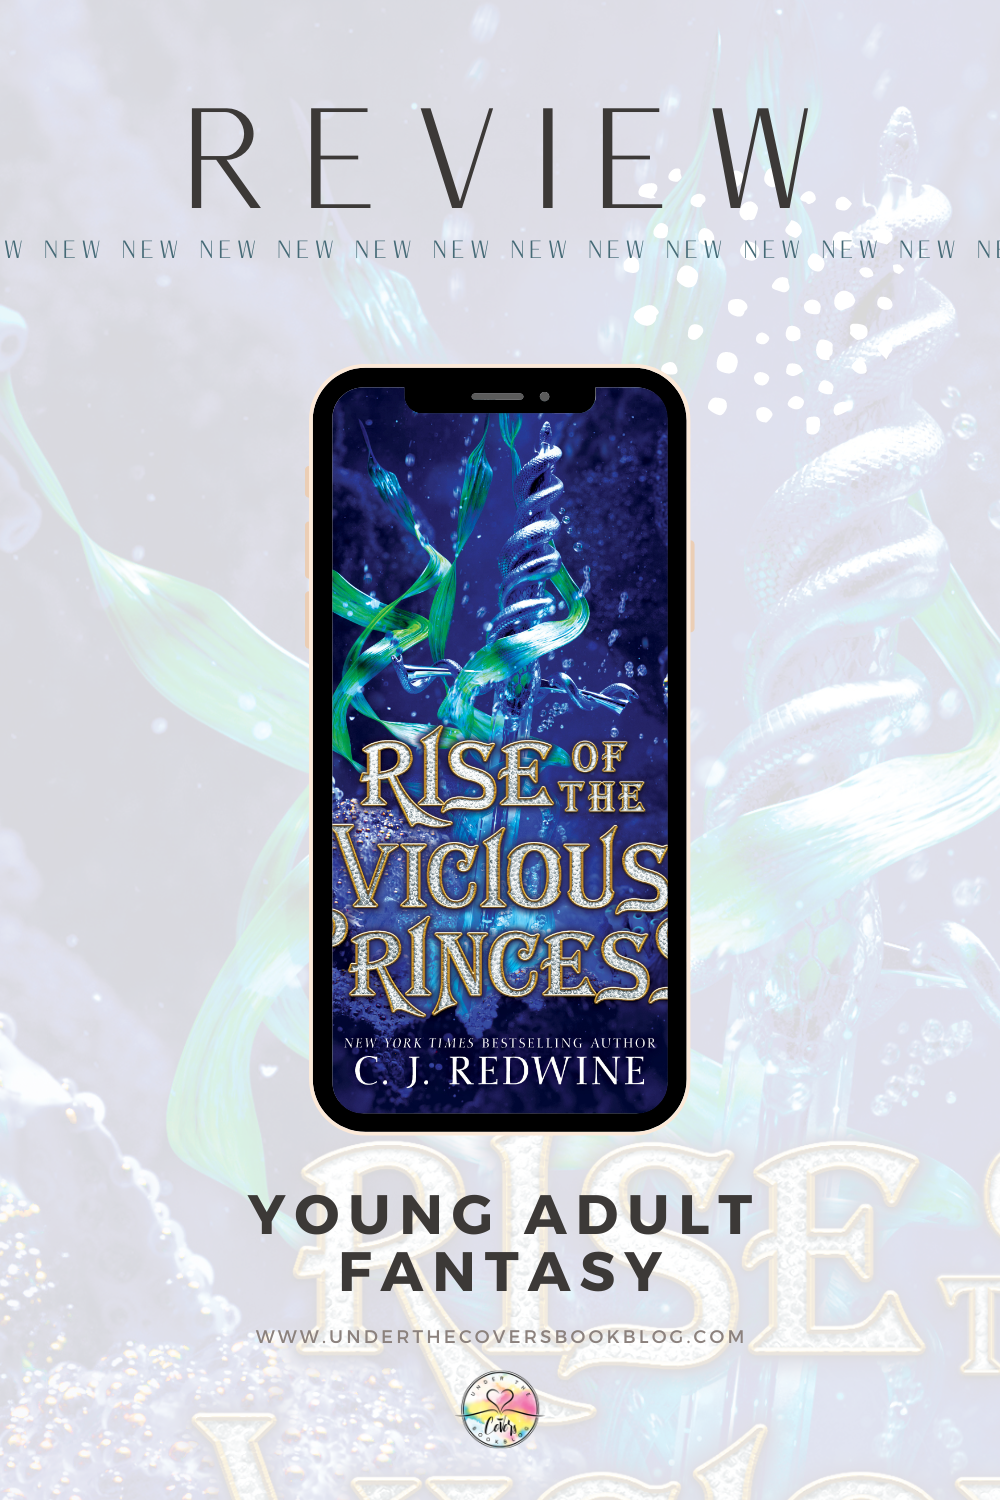 Young Adult Fantasy Review: Rise of the Vicious Princess by C.J. Redwine